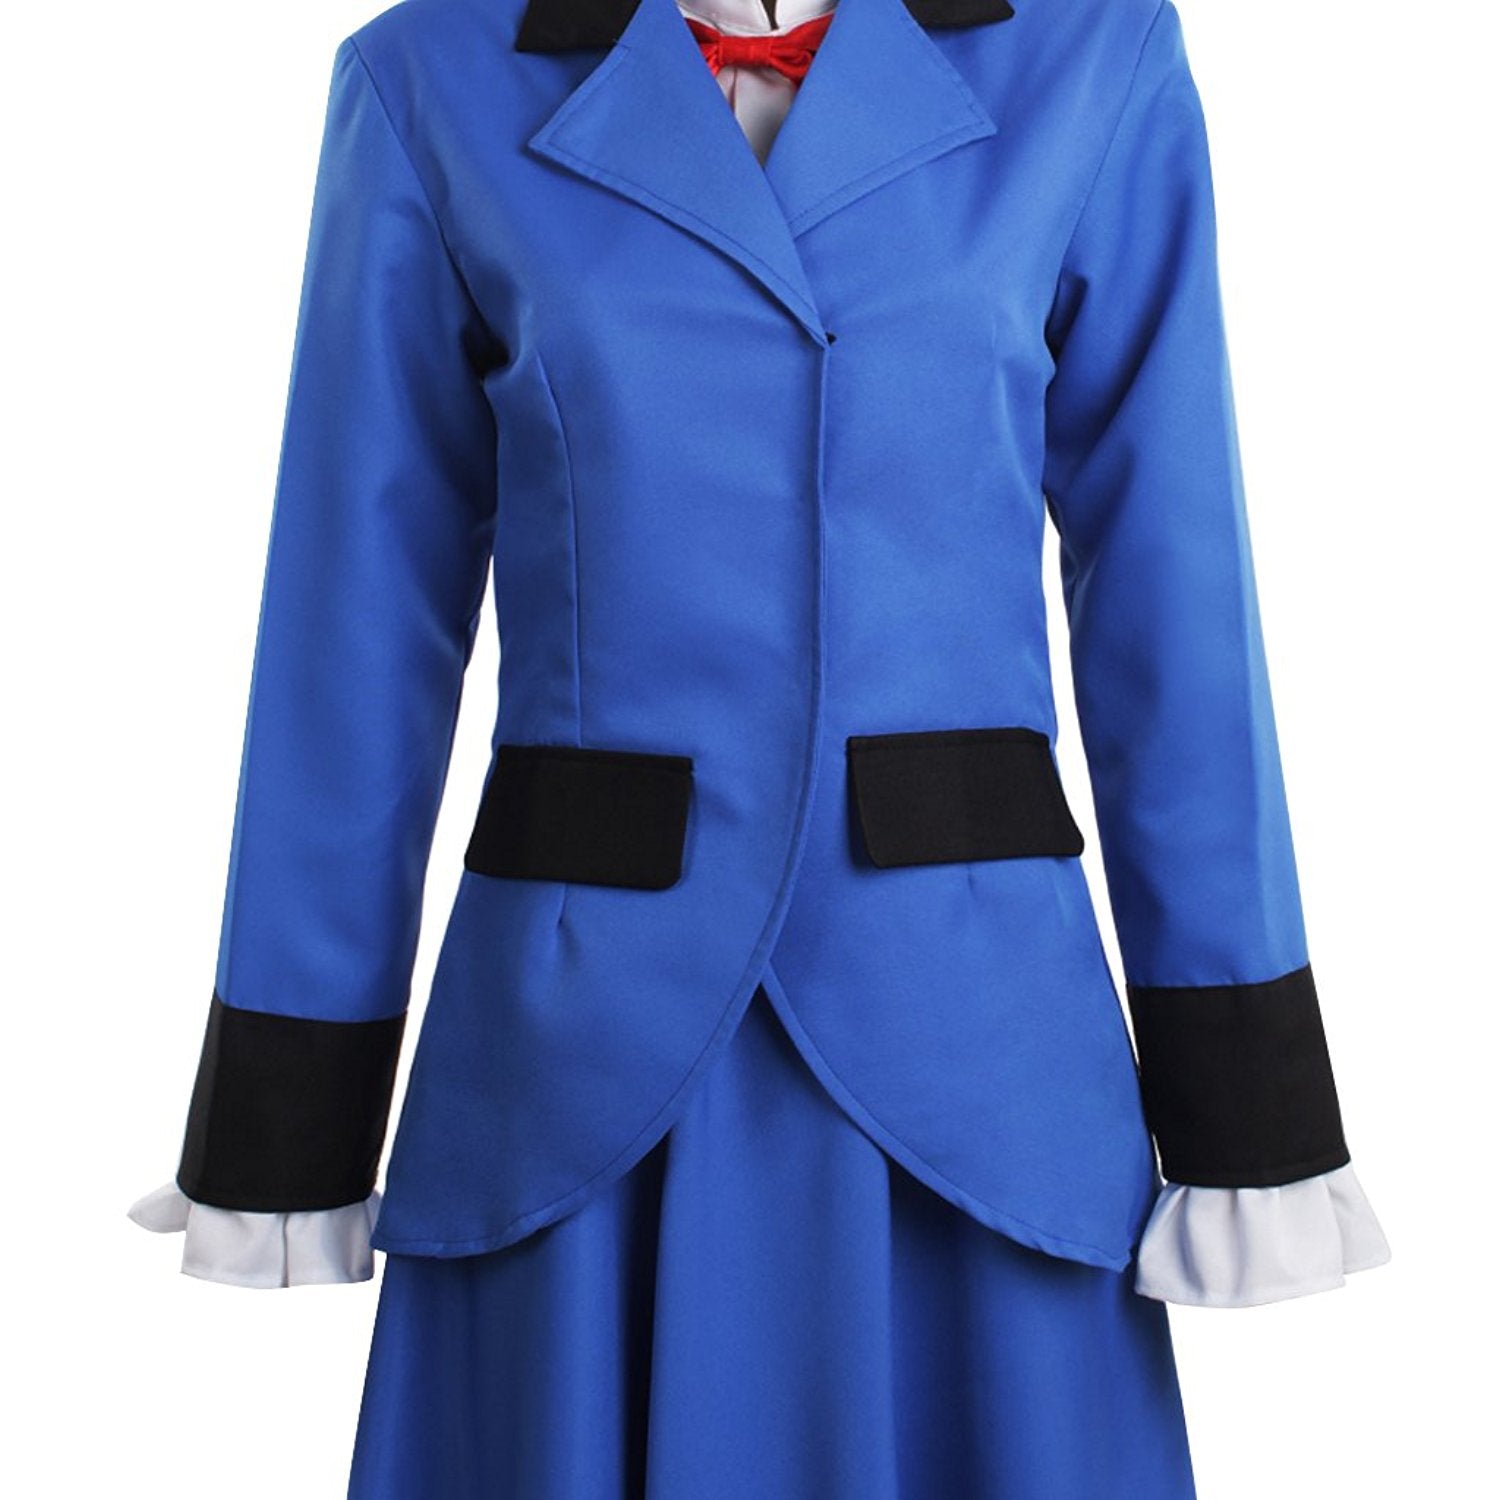 Mary Poppins Cosplay Costume Women Blue Dress